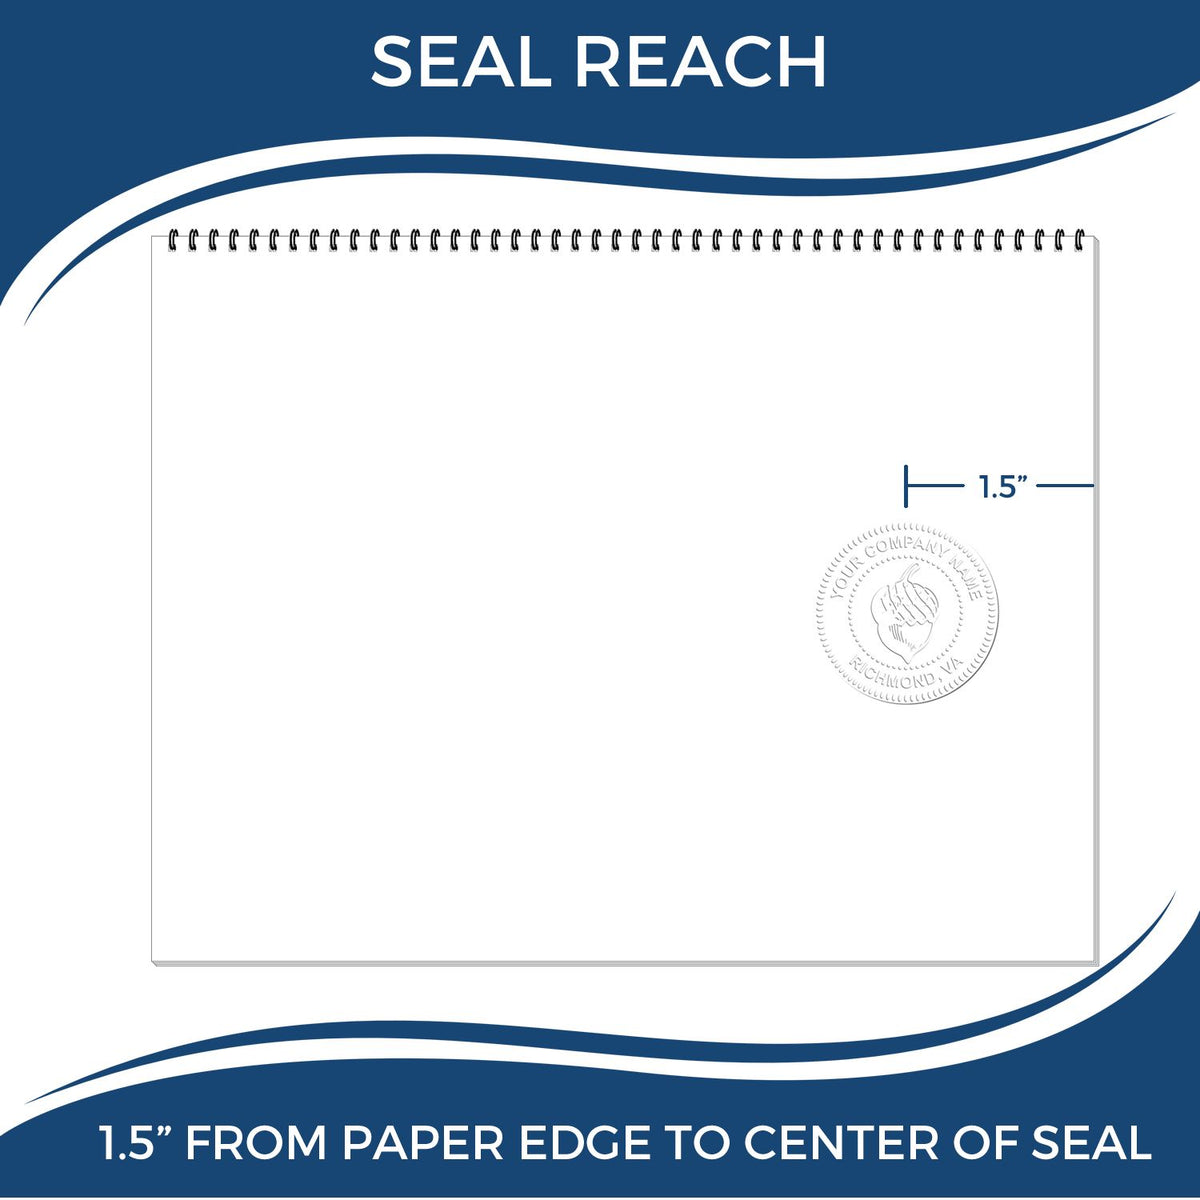 An infographic showing the seal reach which is represented by a ruler and a miniature seal image of the Virginia Desk Architect Embossing Seal